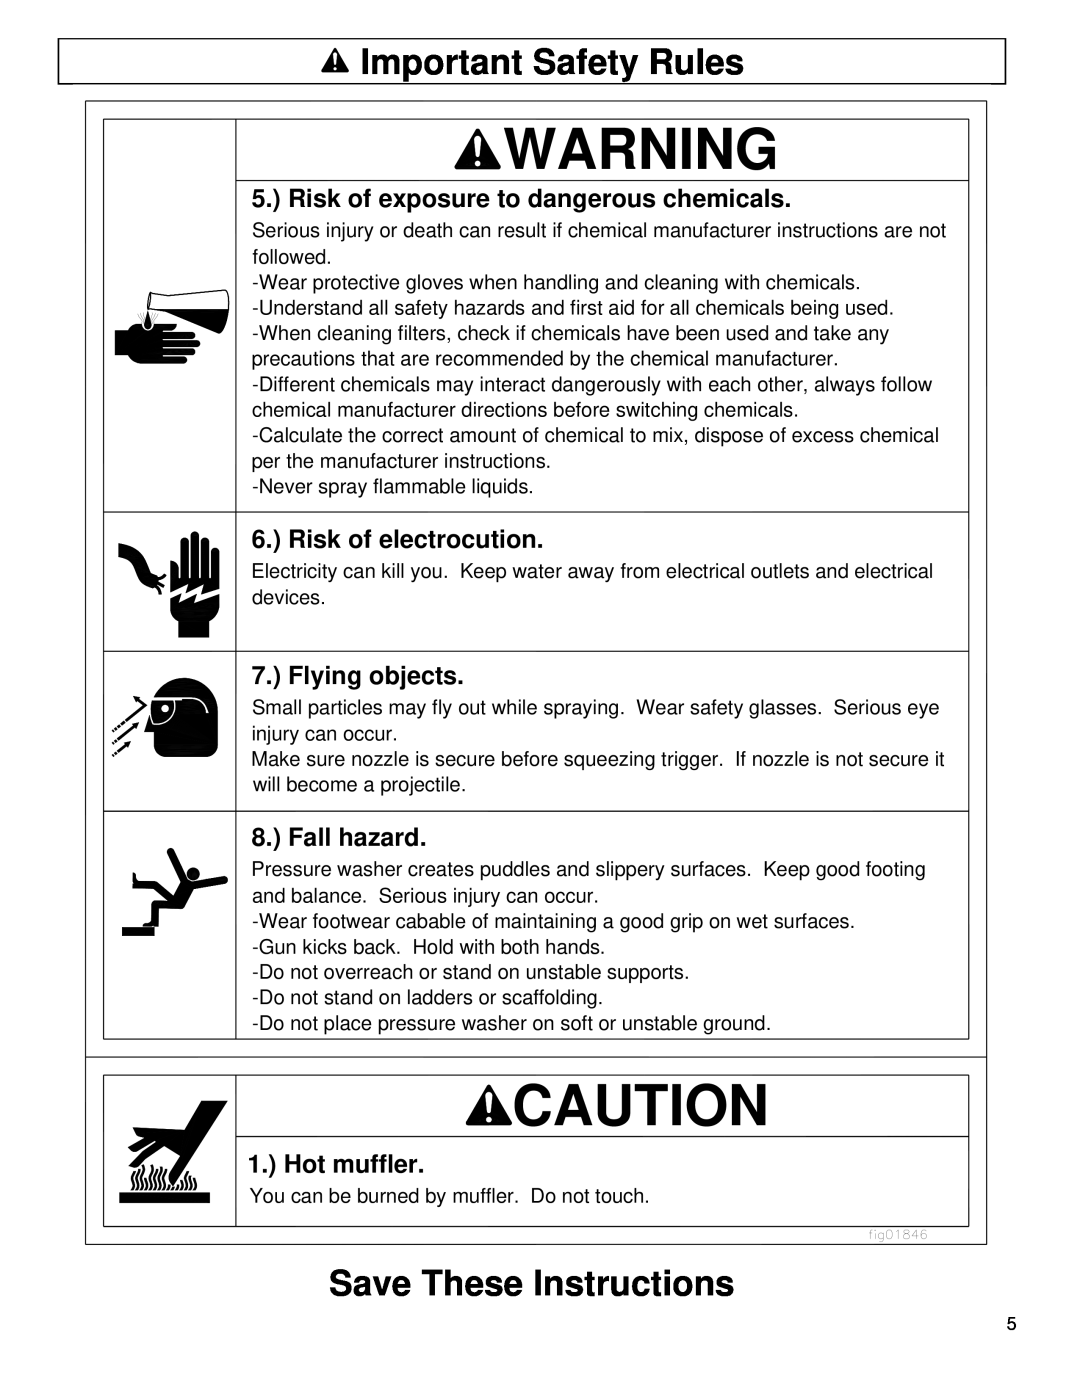 North Star M157477A Important Safety Rules, Save These Instructions, Risk of exposure to dangerous chemicals, Fall hazard 